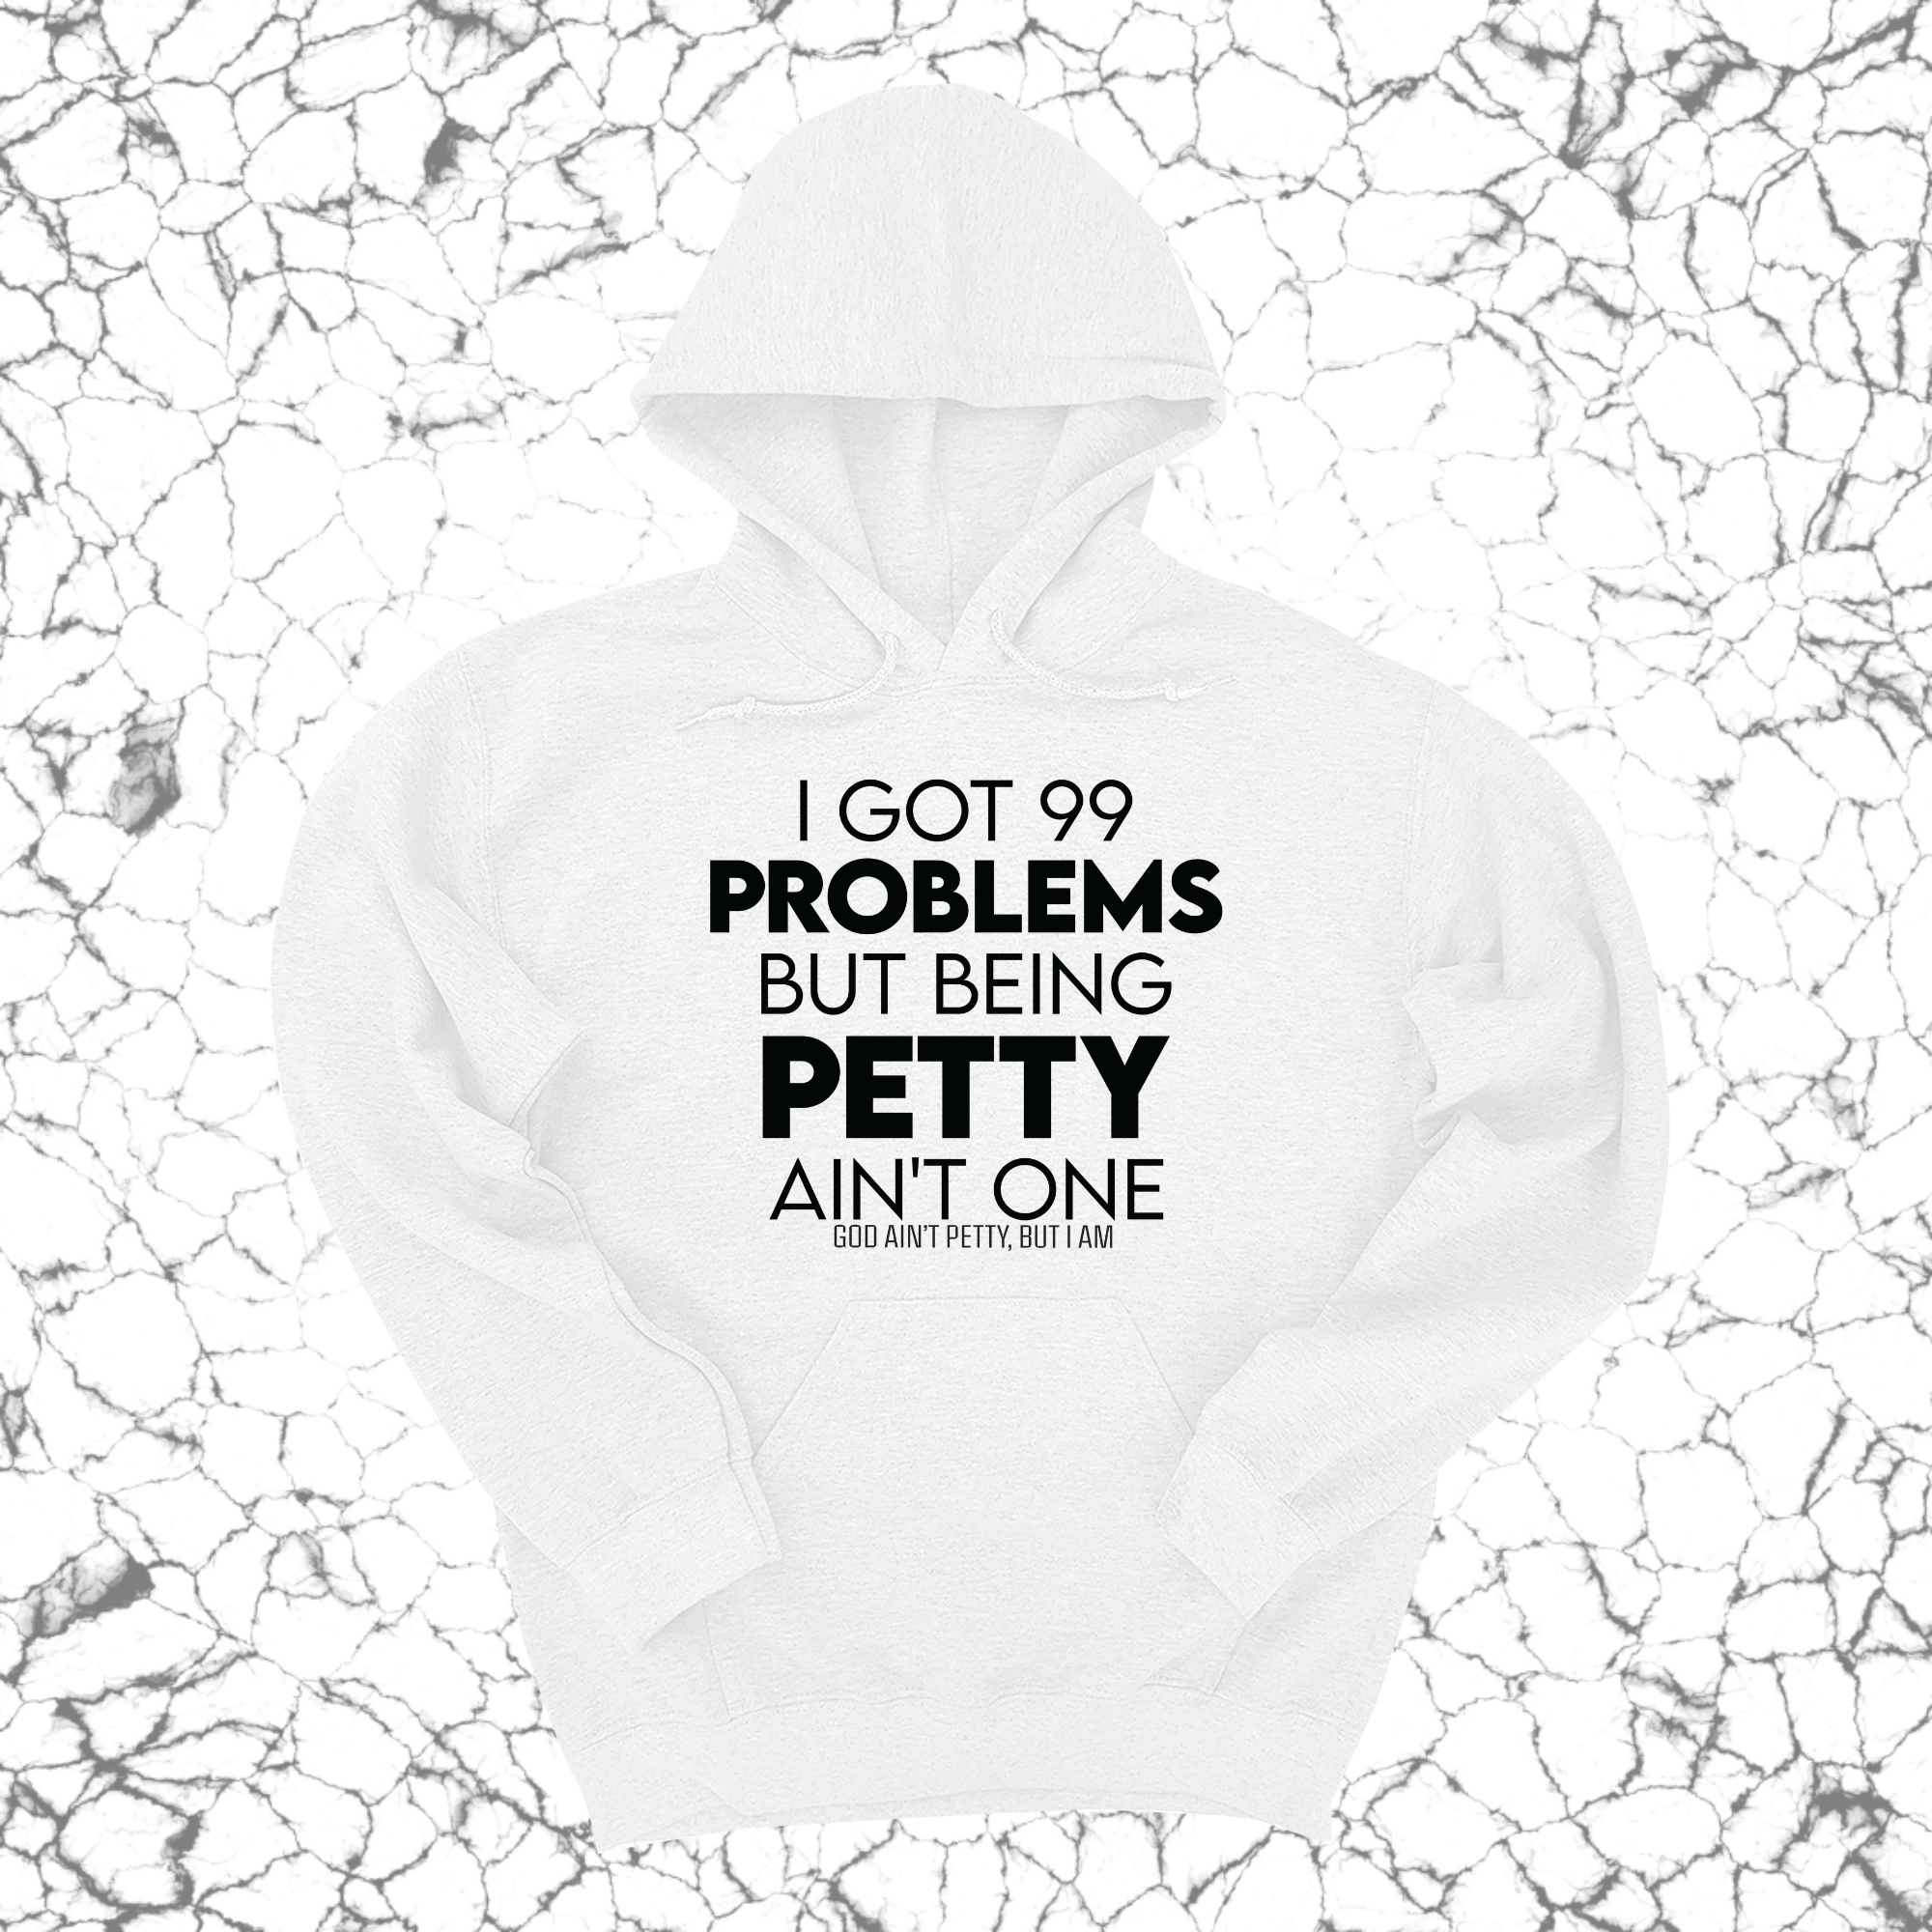 I Got 99 Problems but being Petty Ain't One Unisex Hoodie-Hoodie-The Original God Ain't Petty But I Am